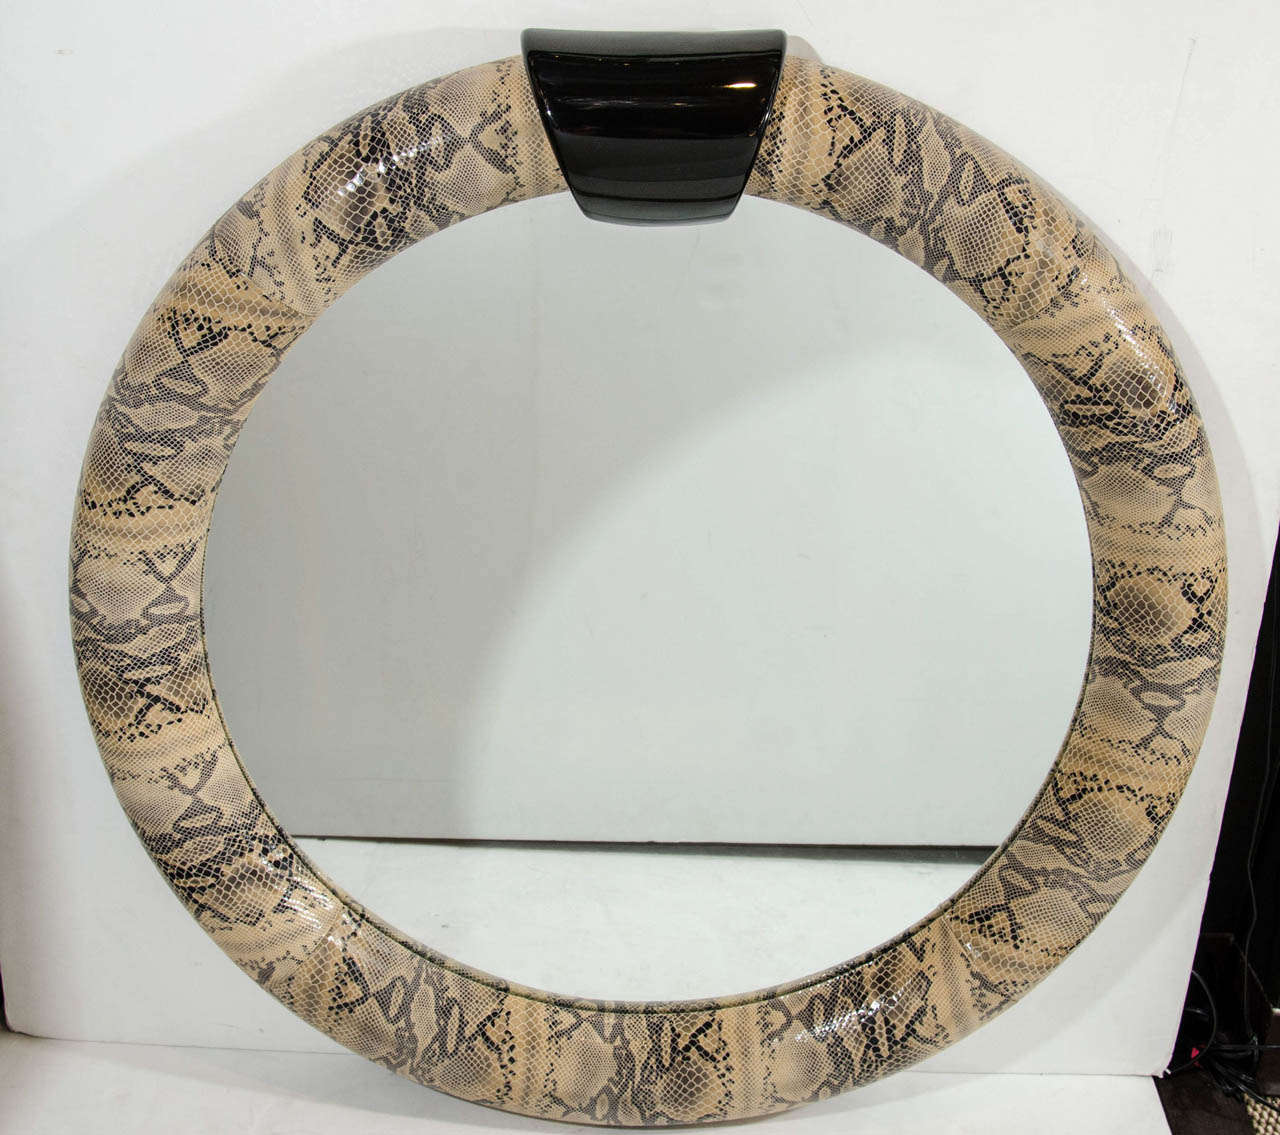 Mid-Century Modern round mirror wrapped in stunning embossed leather with snakeskin design. Python print leather with lacquered ebonized wood pediment top.